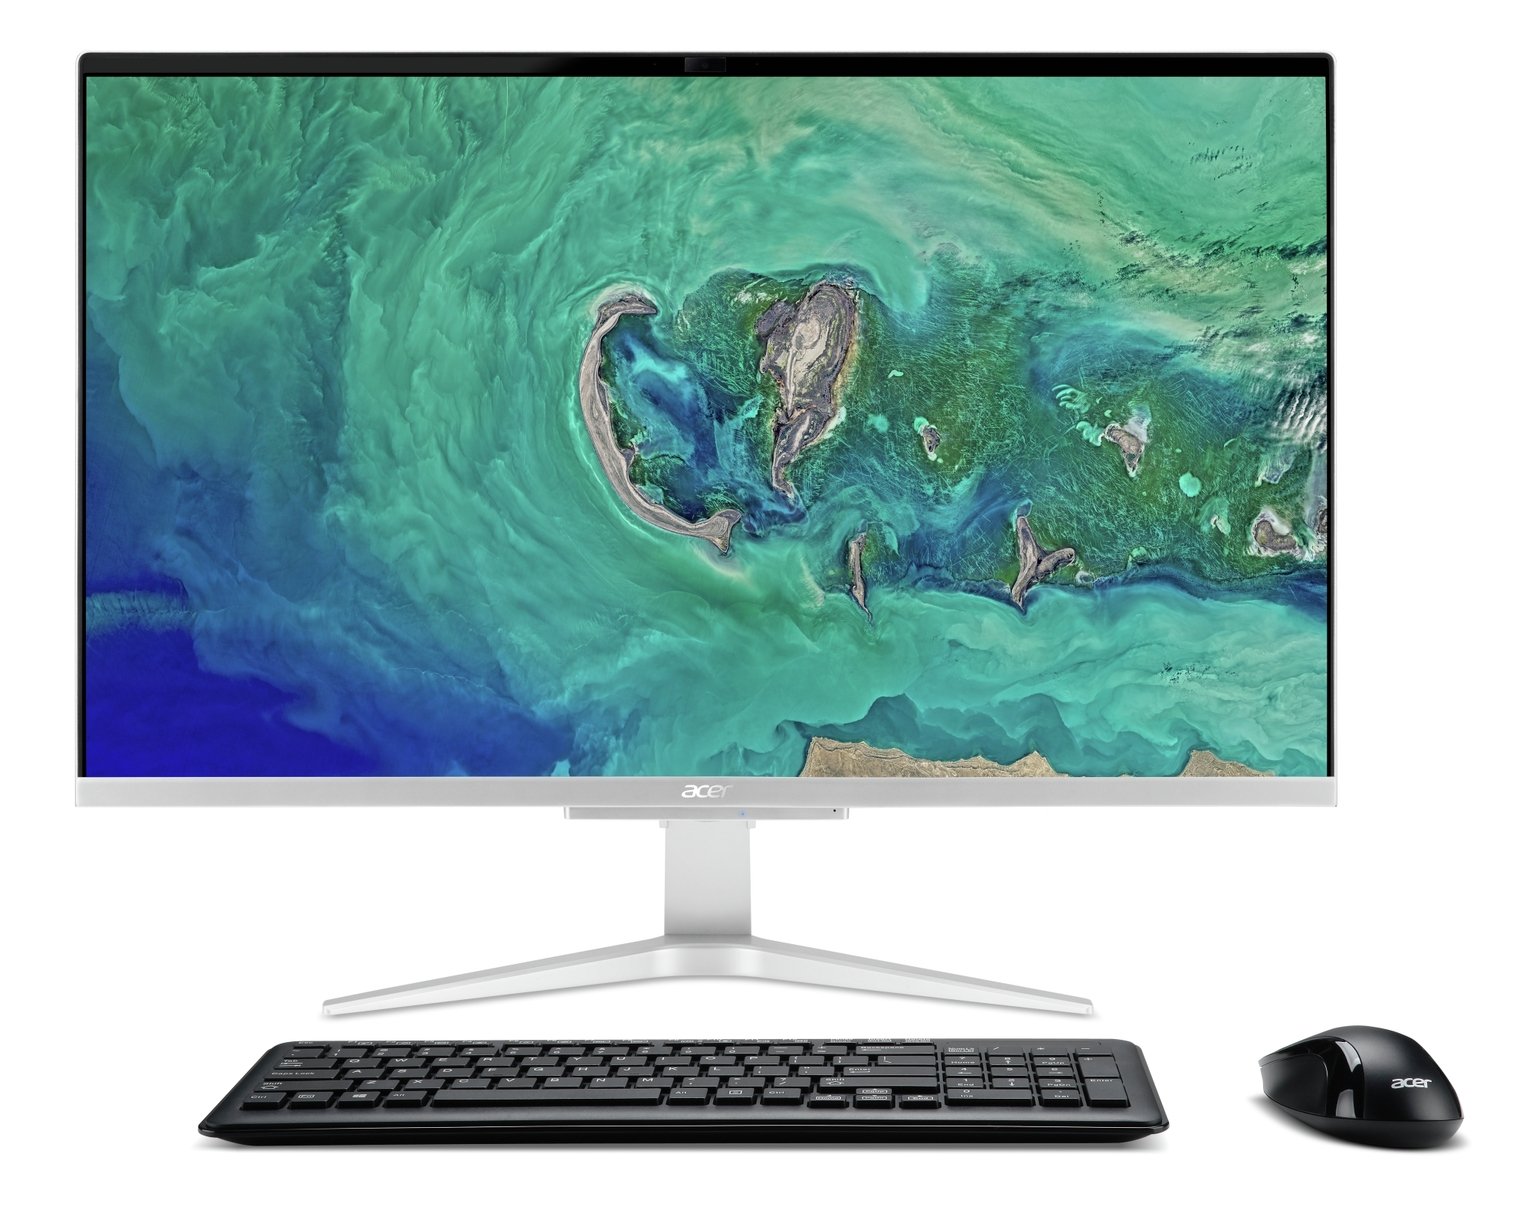 Acer Aspire C27 27 Inch i5 8GB 1TB FHD All-in-One PC